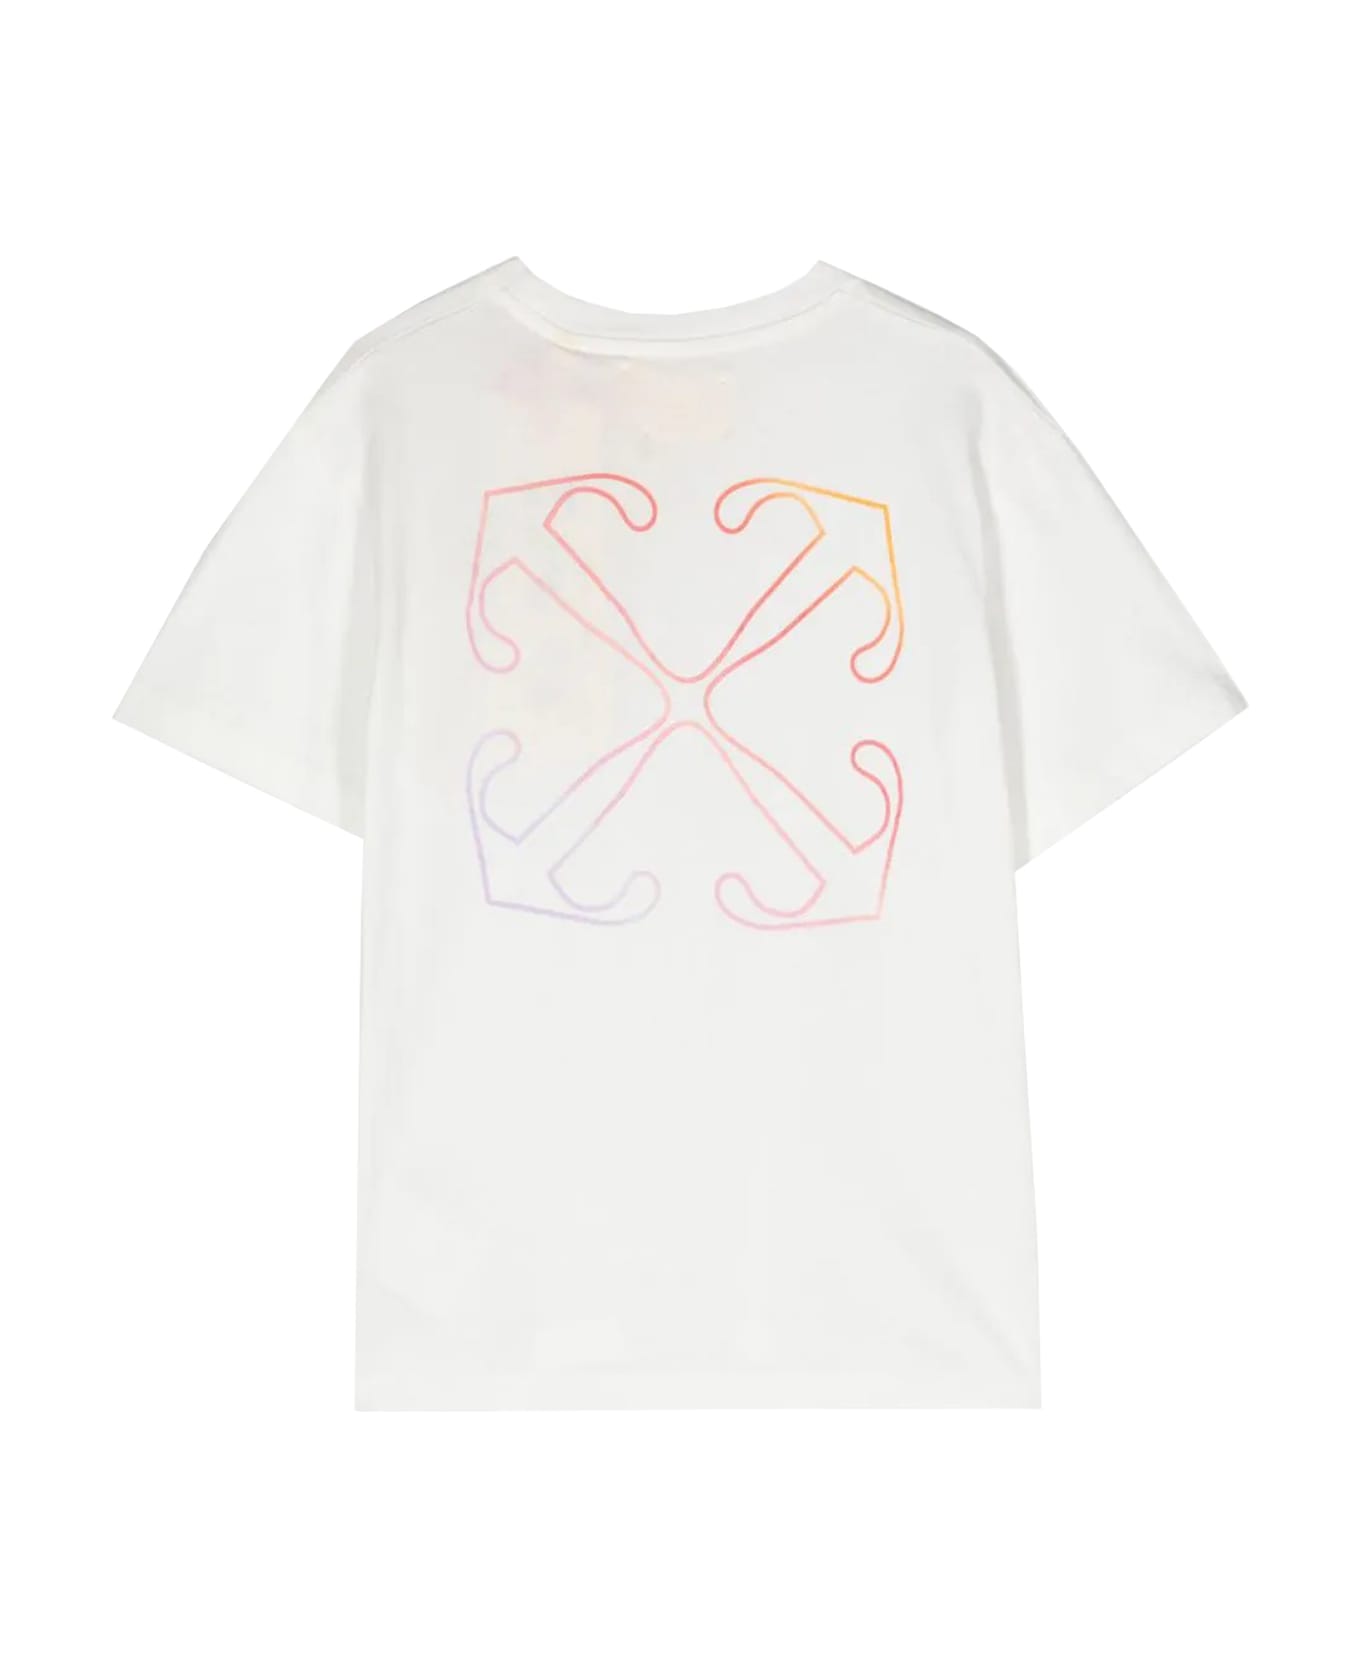 Off-White T-shirt With Print - White Tシャツ＆ポロシャツ